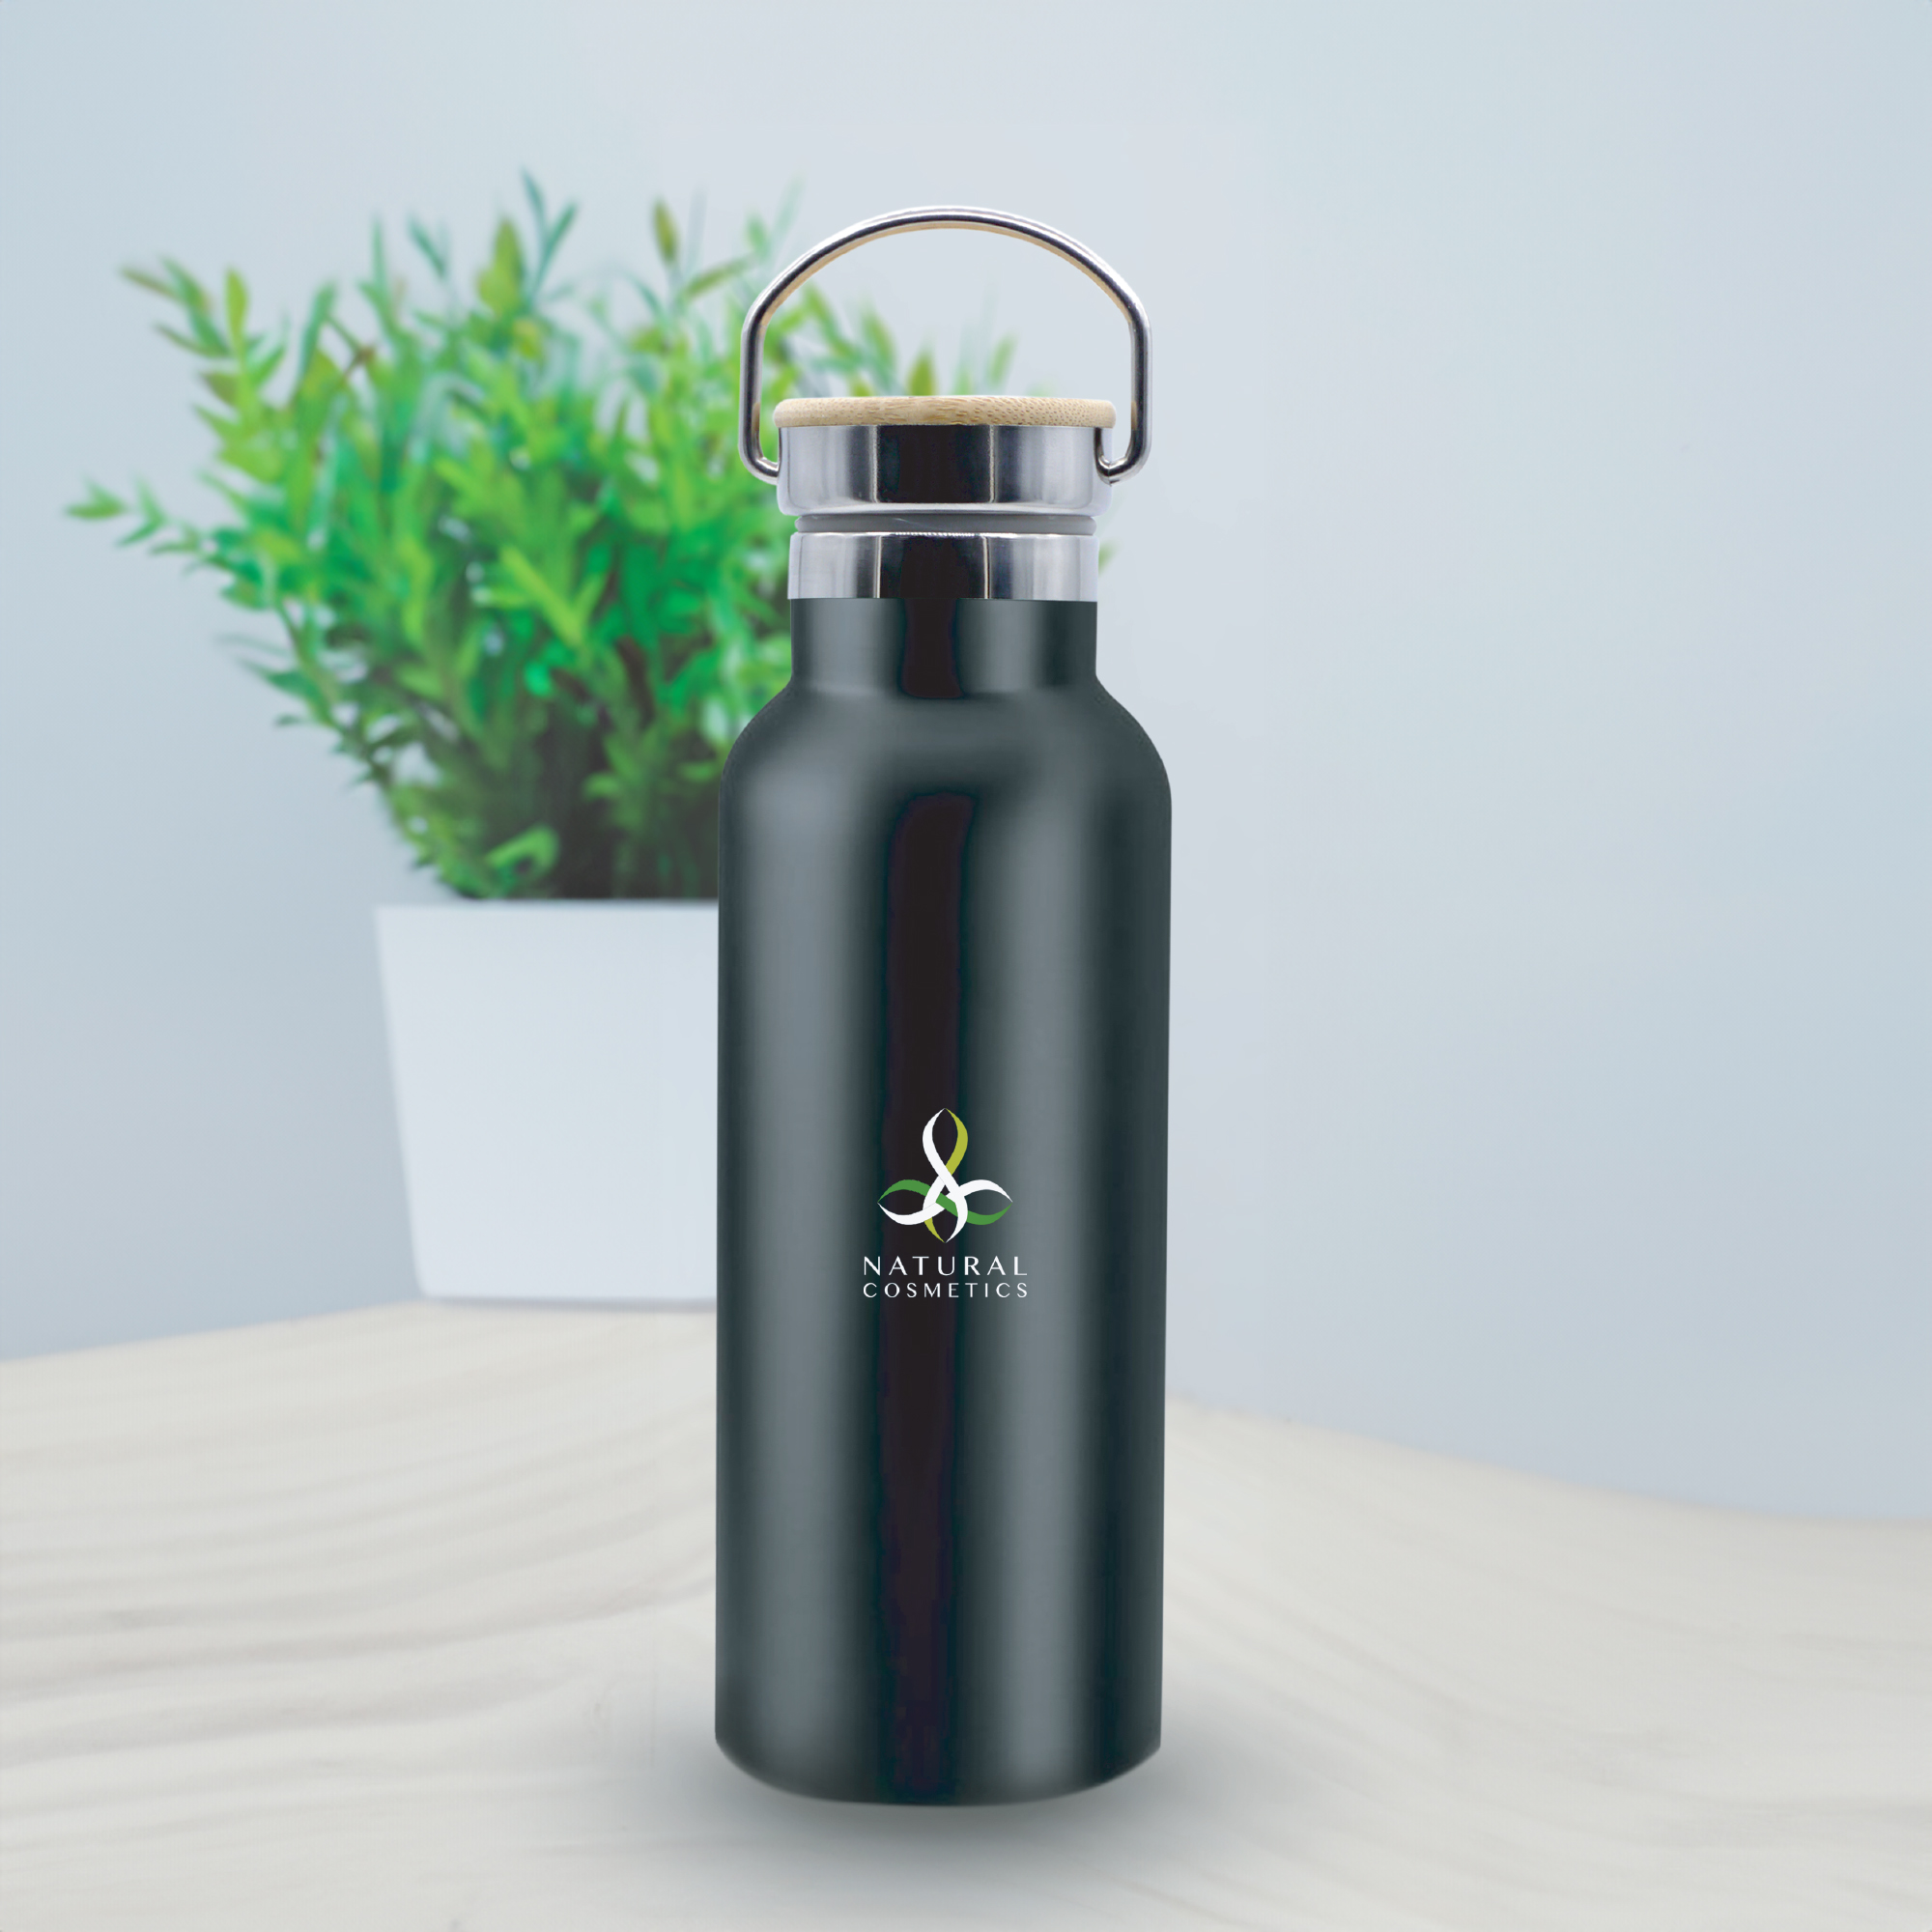 "Insulated Bottle With Bamboo Cap: Stylish and eco-friendly beverage container for temperature-controlled hydration."